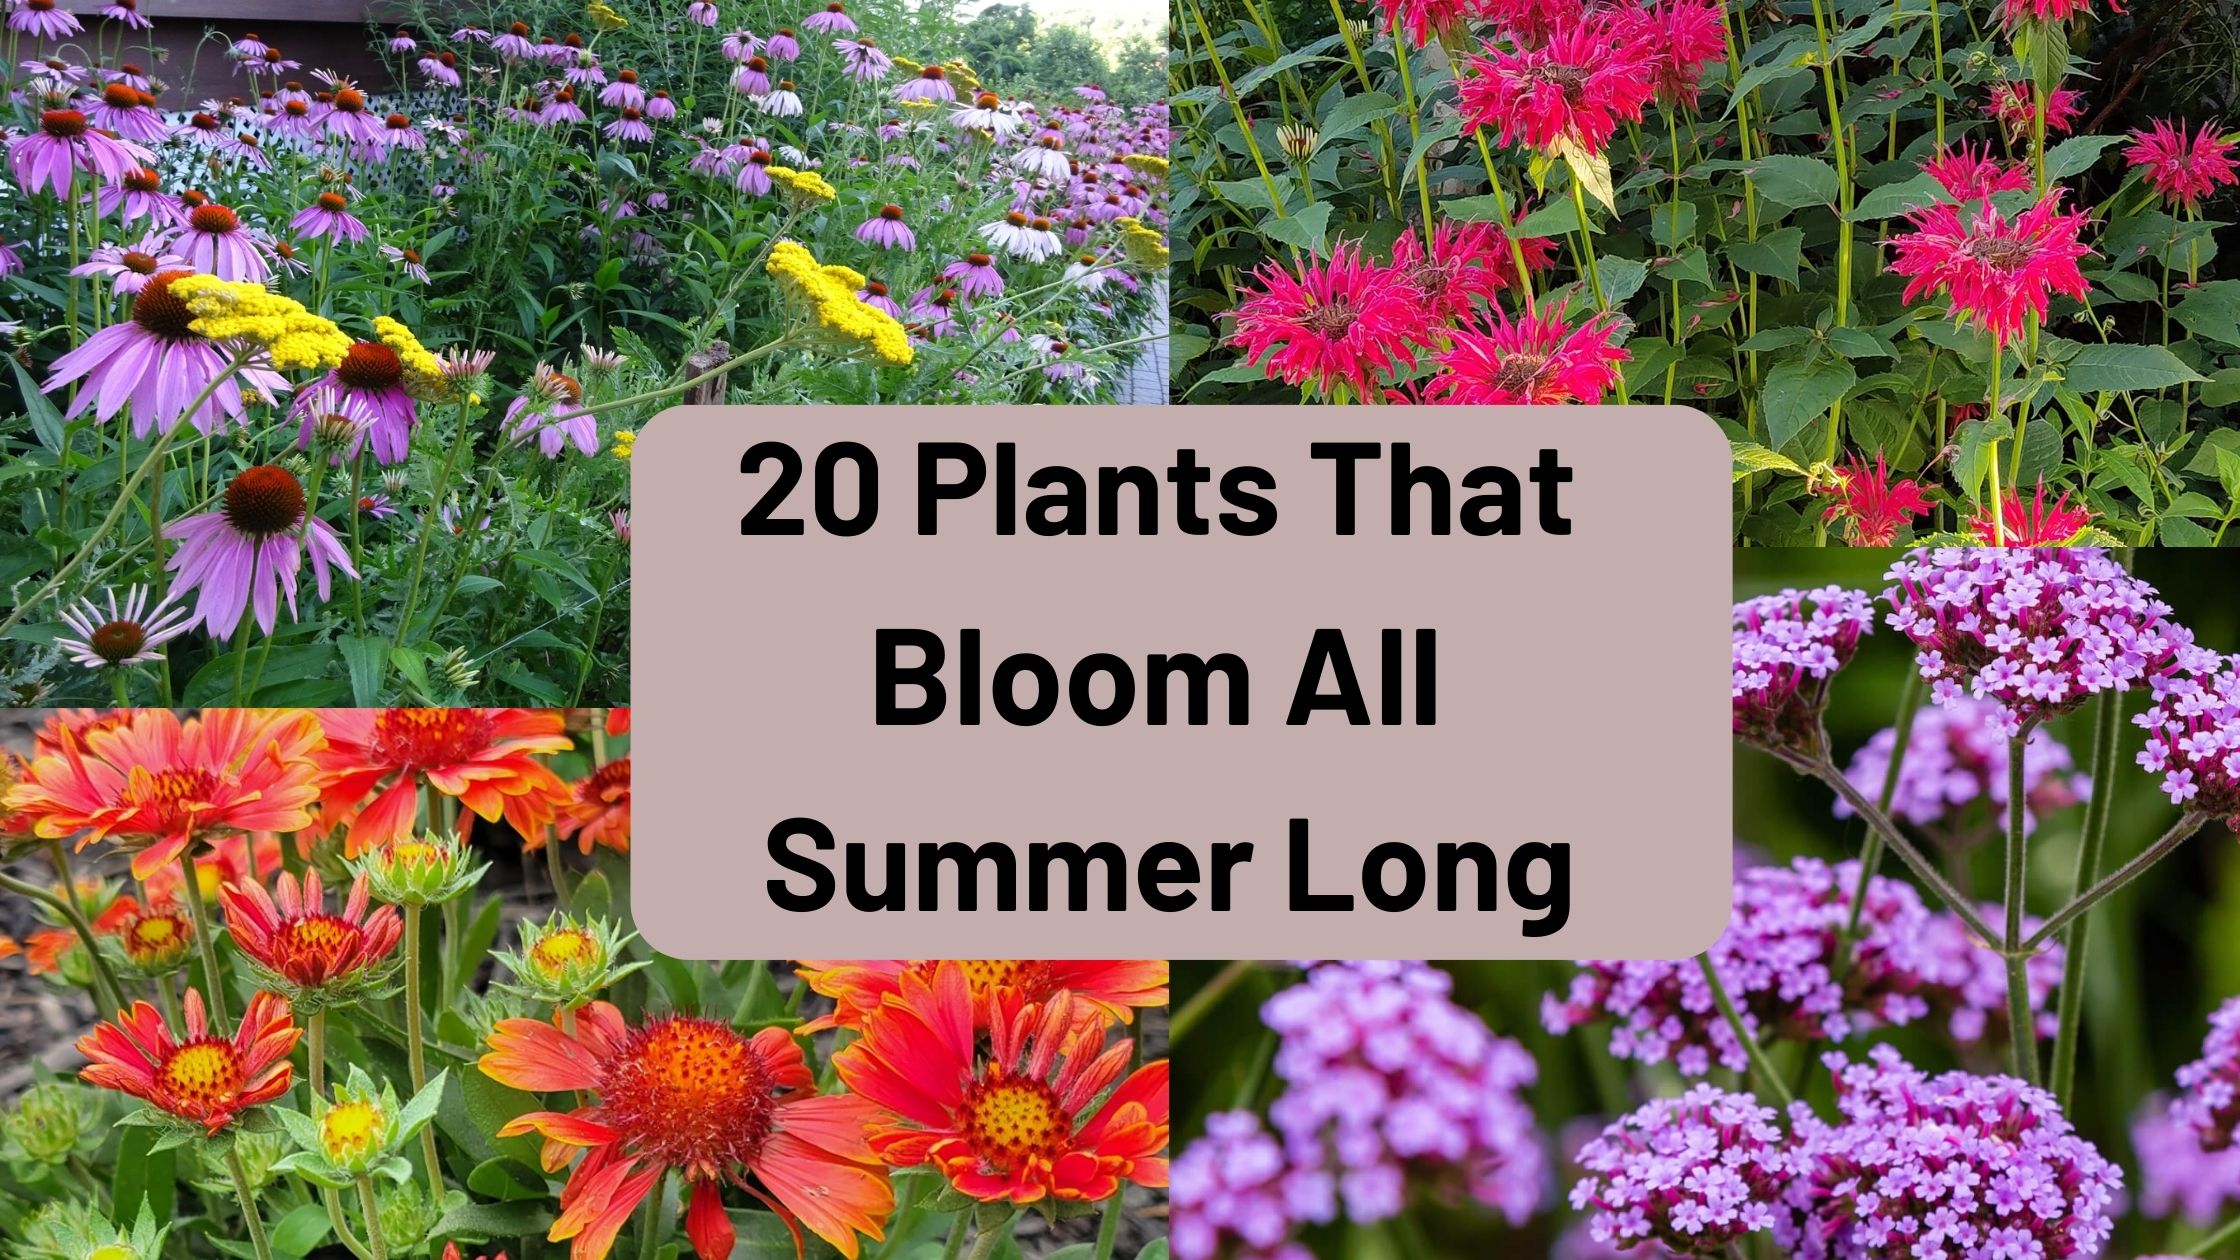 Plants That Bloom All Summer Long